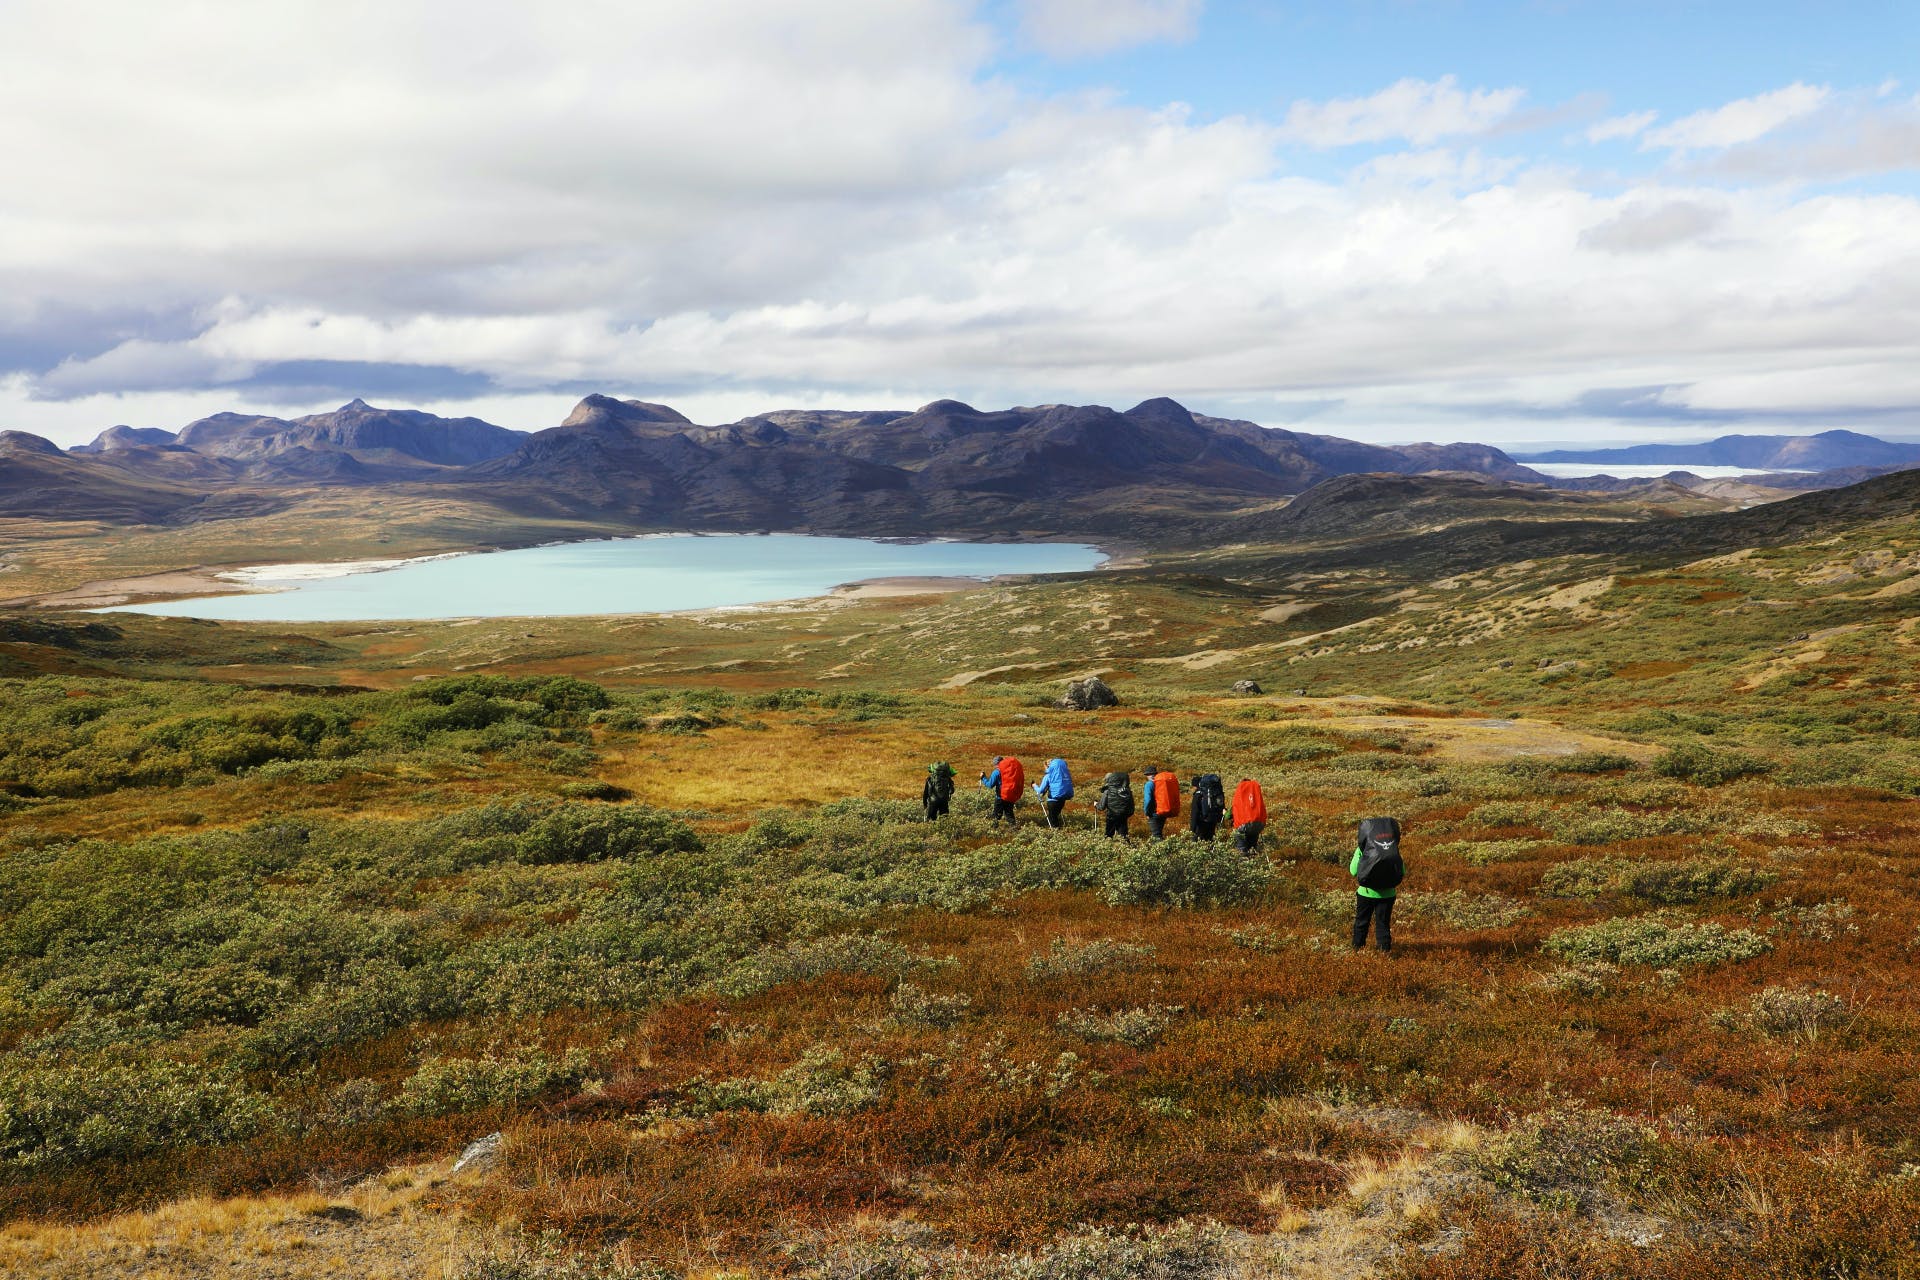 A group of hikers treks across the Greenland wilderness - a lake and mountains in the background.